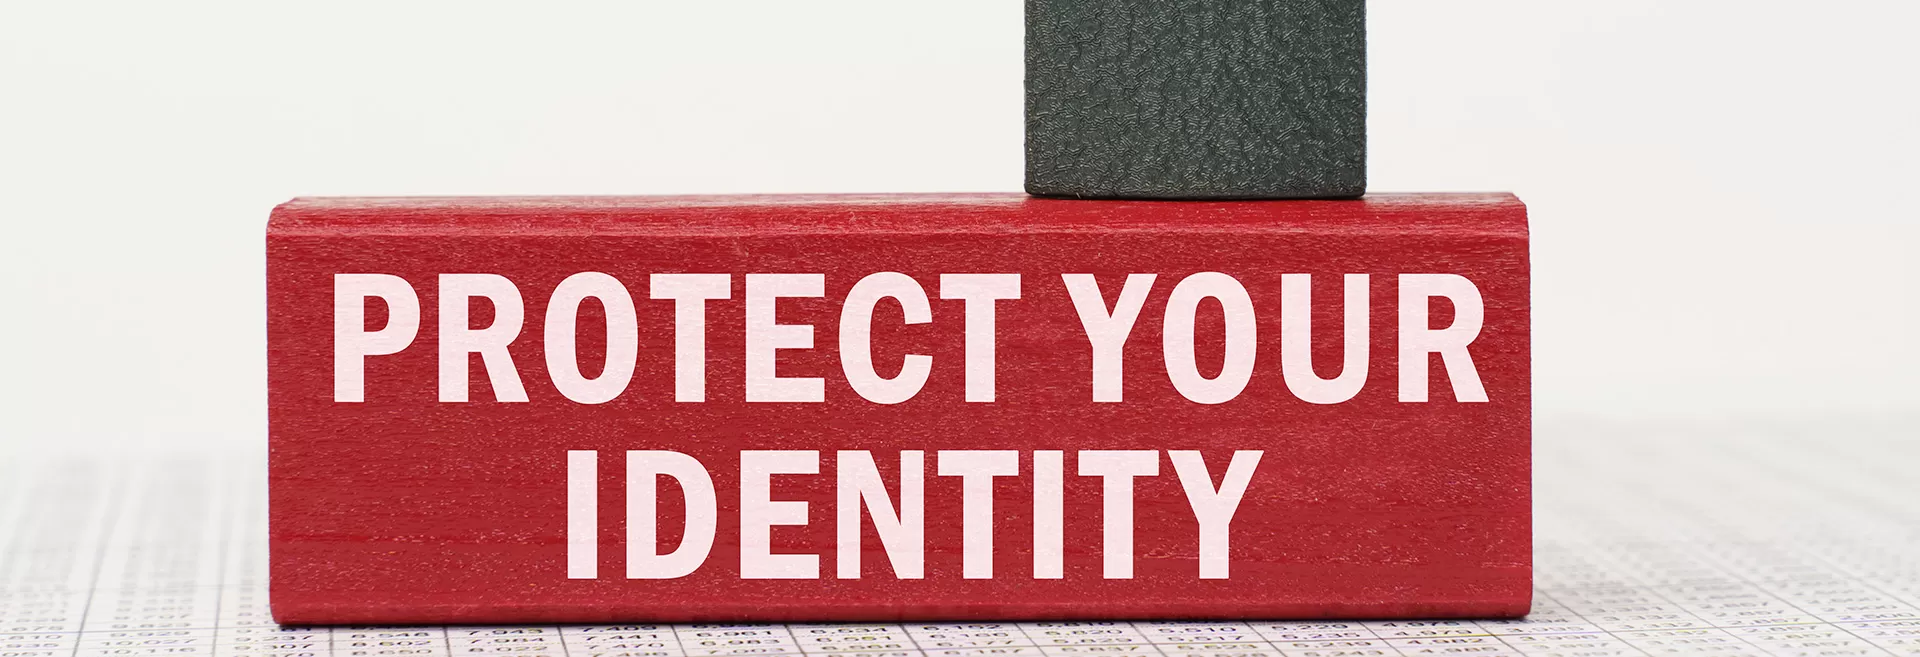 Protect your identity in red block with lock on top